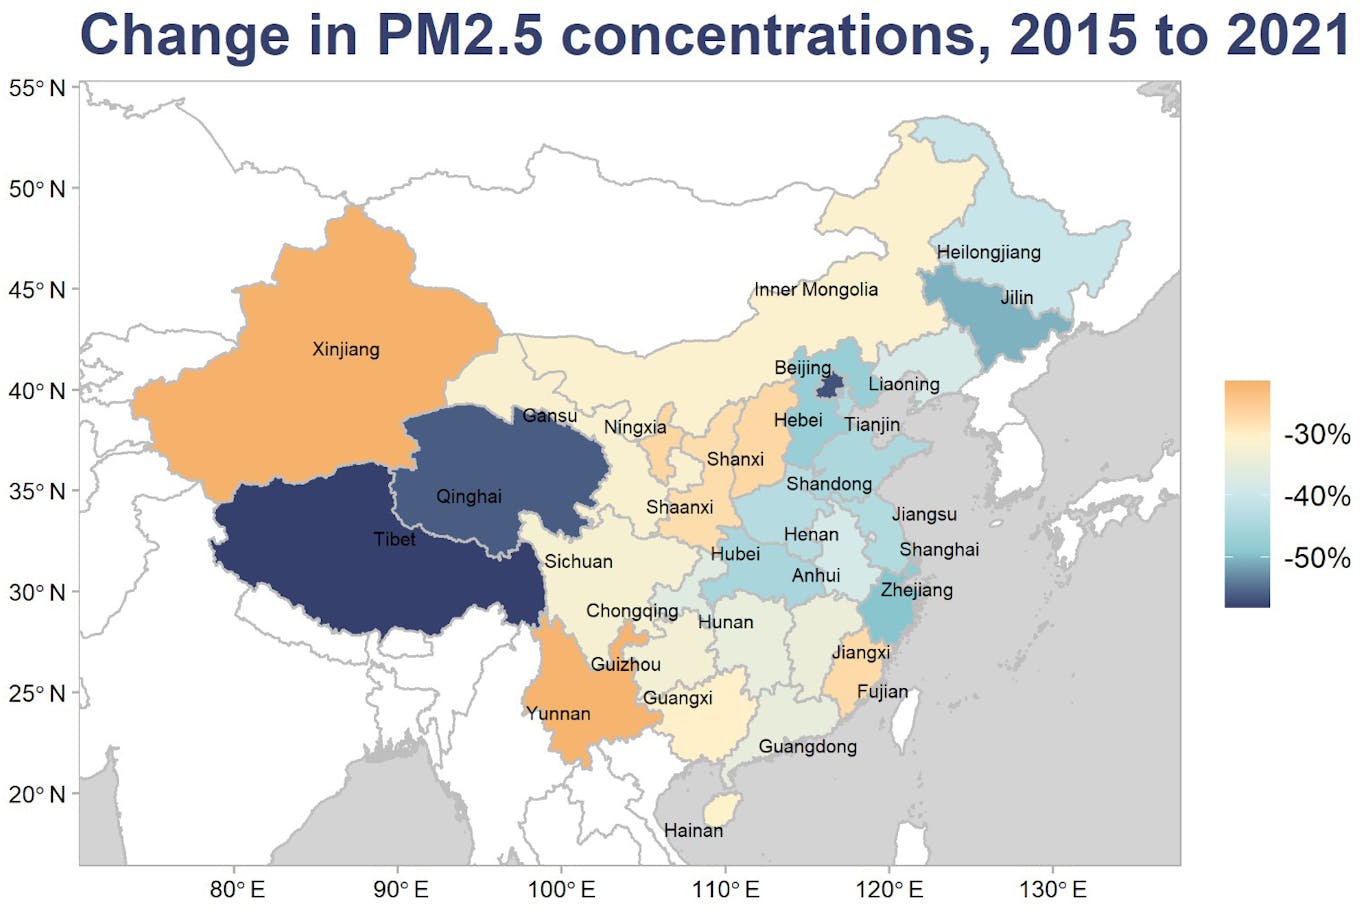 pm2.5 improvements in china 2015-2021